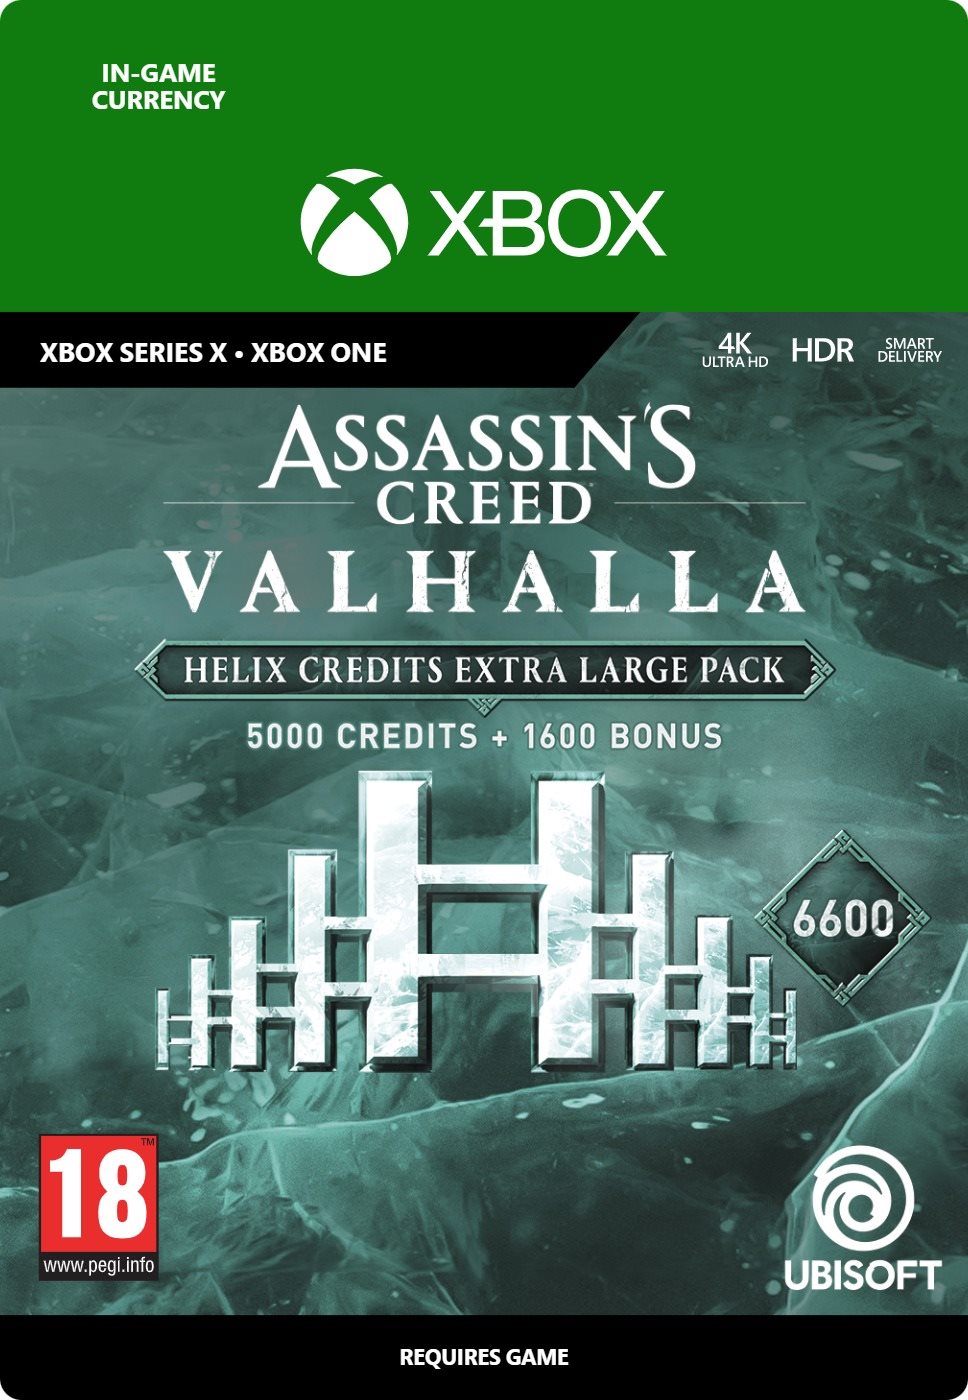 Assassins Creed Valhalla: 6600 Helix Credits Pack - Xbox One Digital